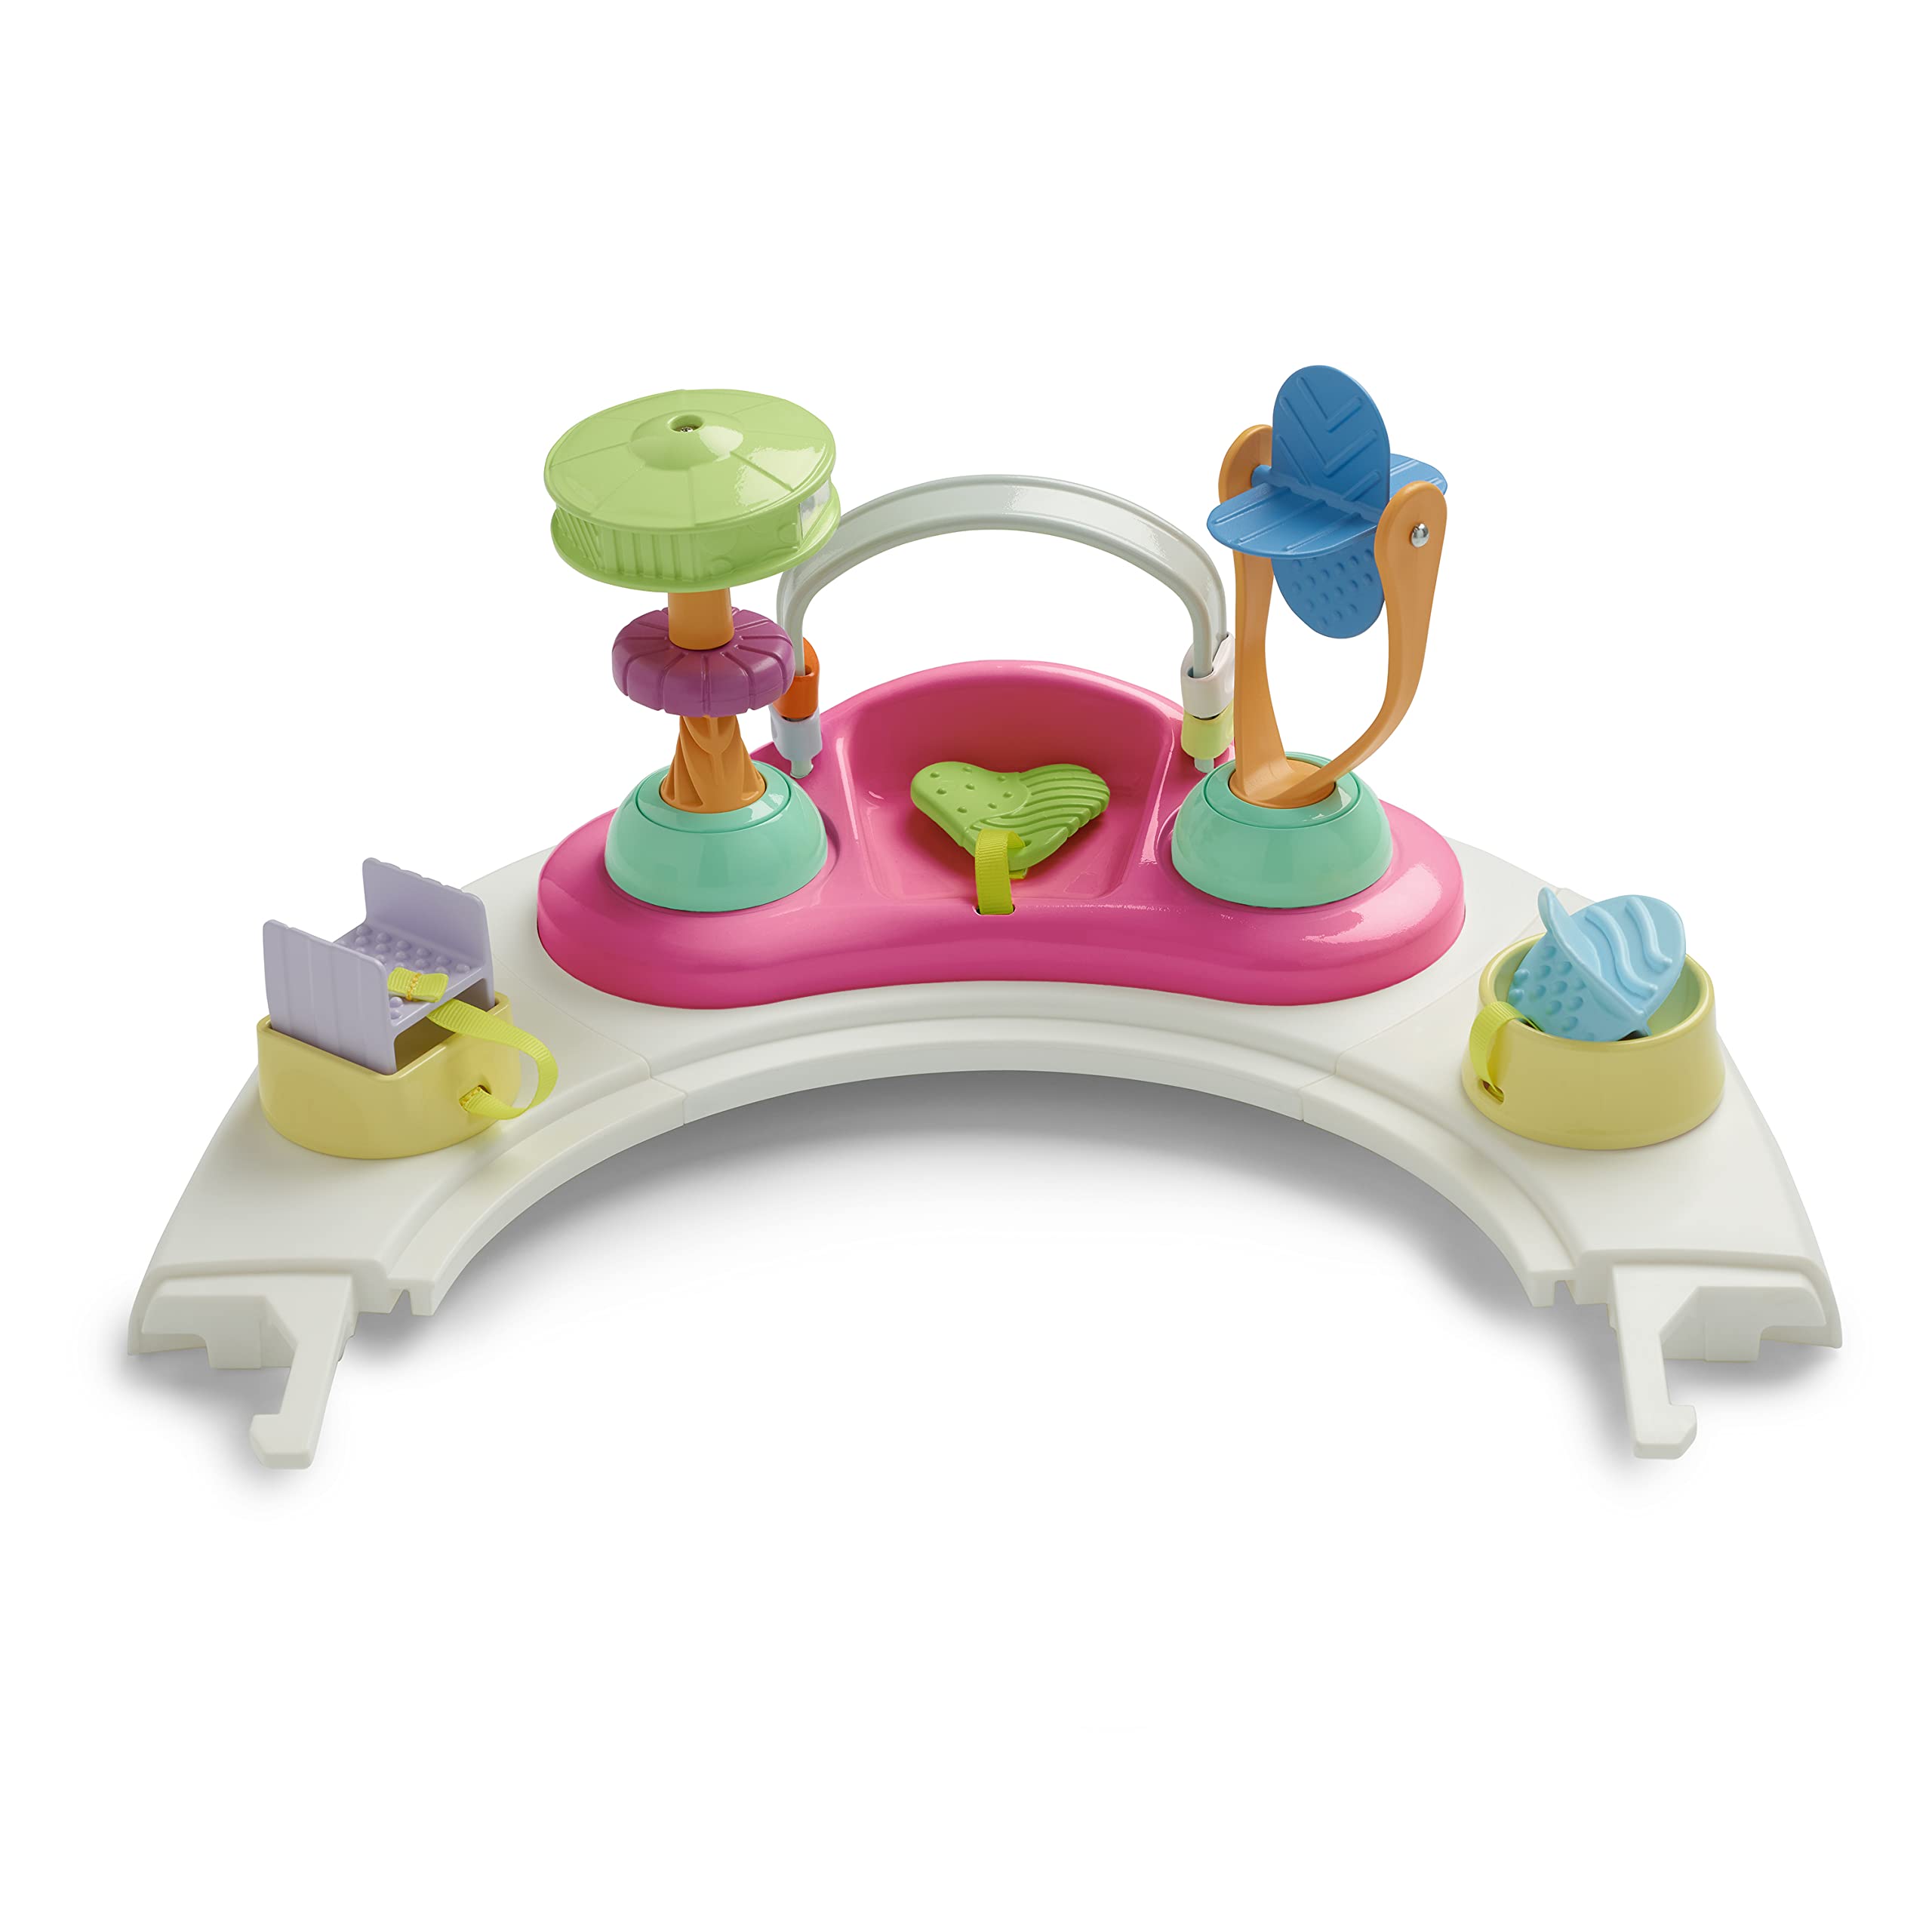 Summer 4-in-1 SuperSeat 360 (Pink) Activity Center for Baby